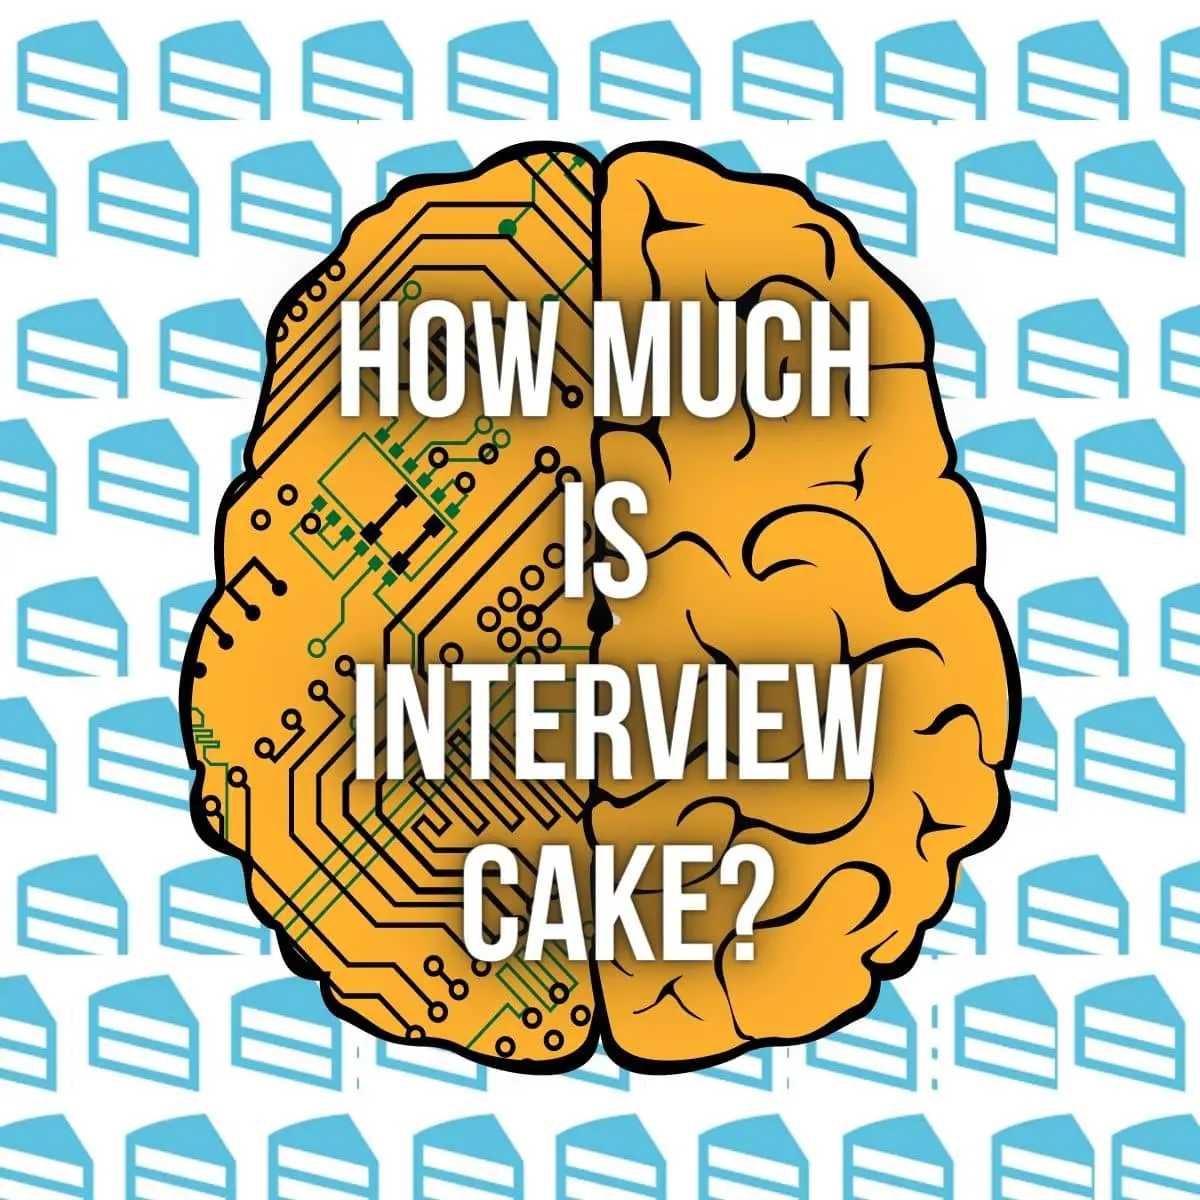 The cost of Interview Cake's course